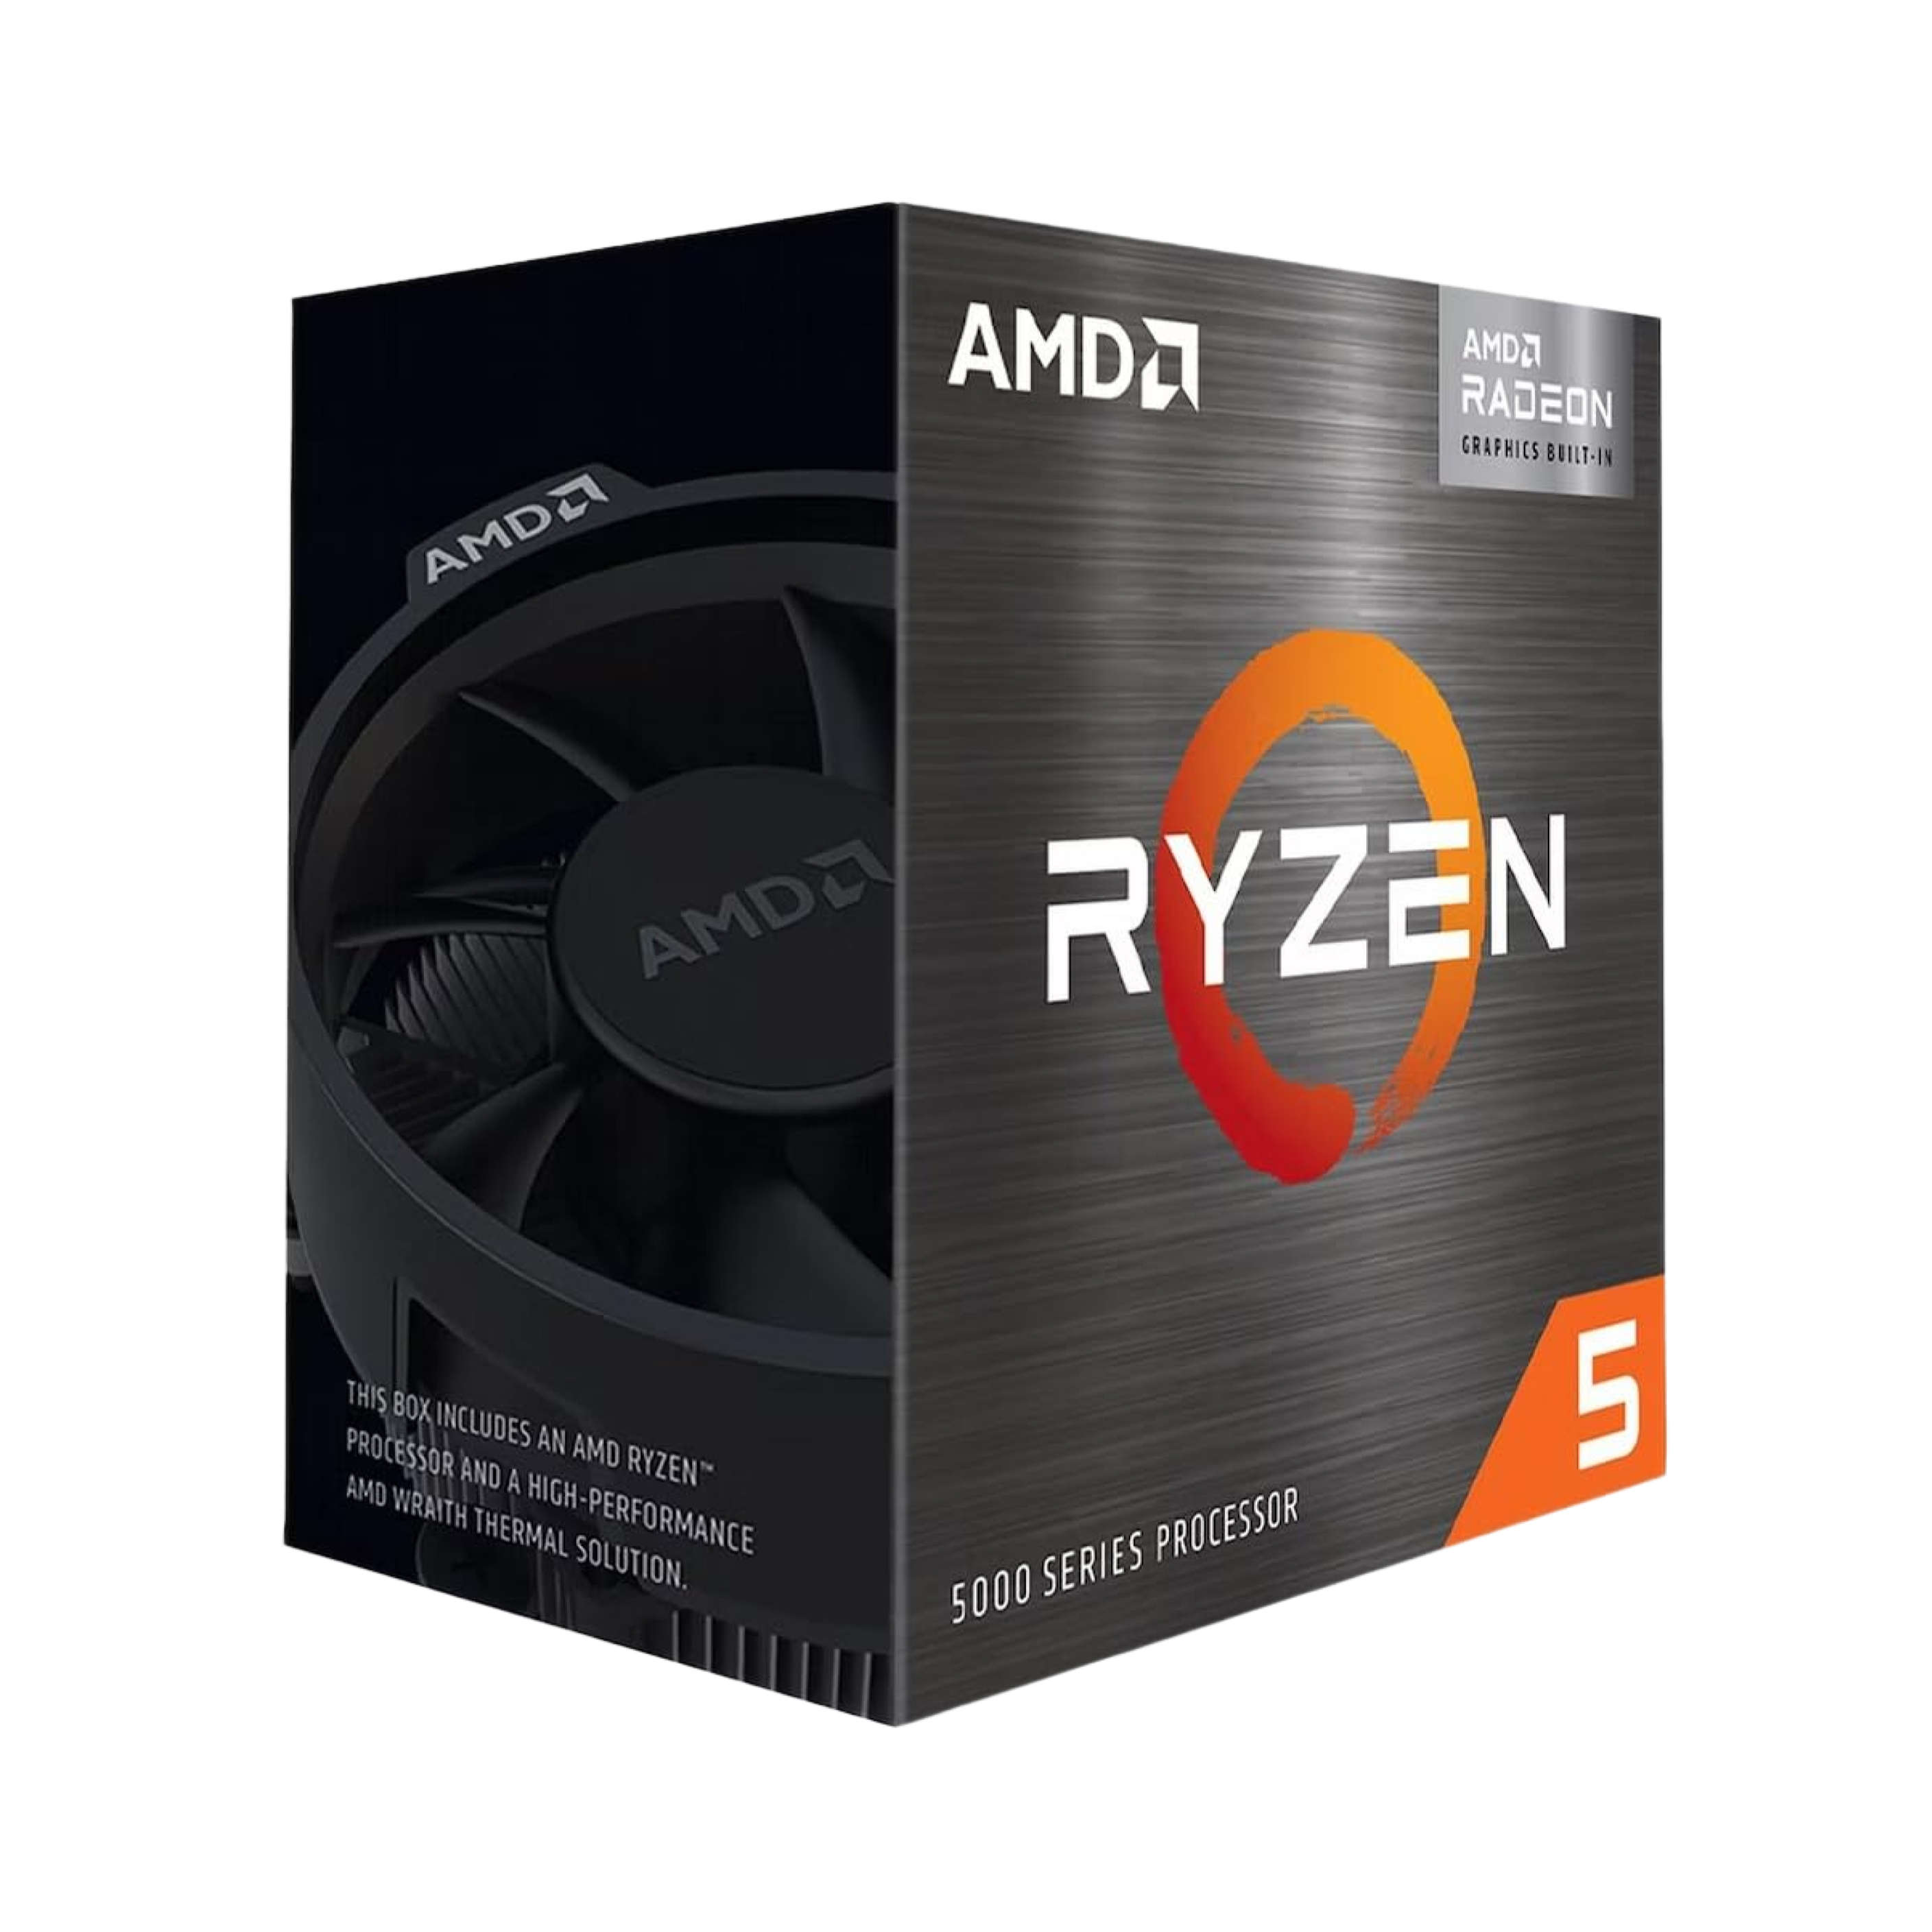 AMD Ryzen 7 5800X 8-Core 16-Thread Unlocked Desktop Processor with Turbo Boost Up to 4.7GHz and No Integrated GPU